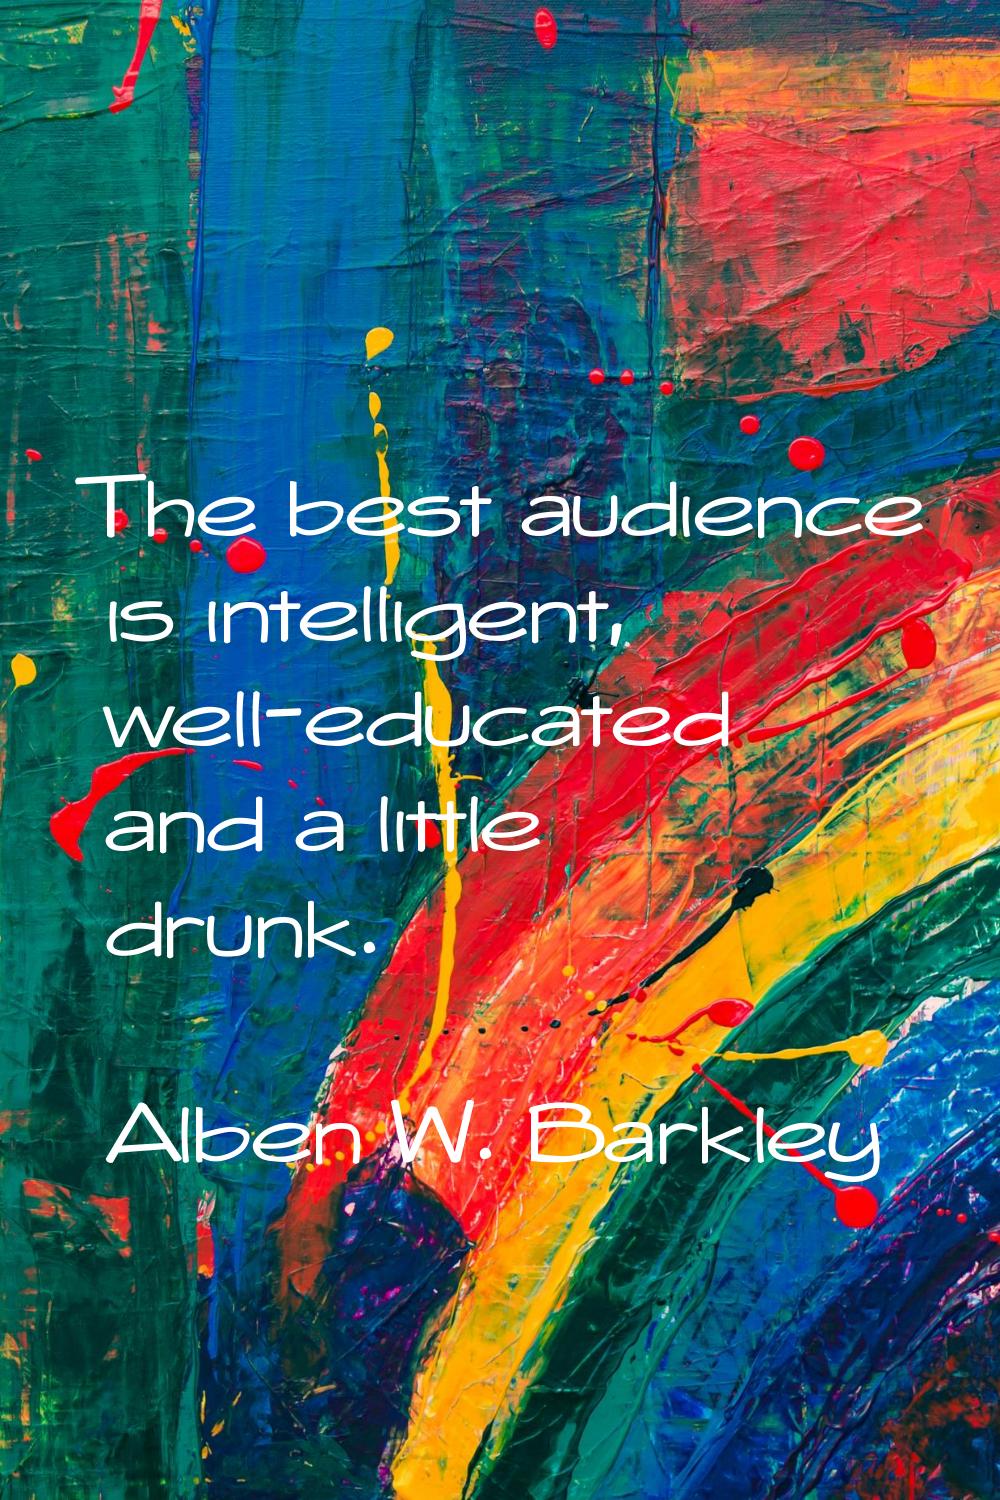 The best audience is intelligent, well-educated and a little drunk.